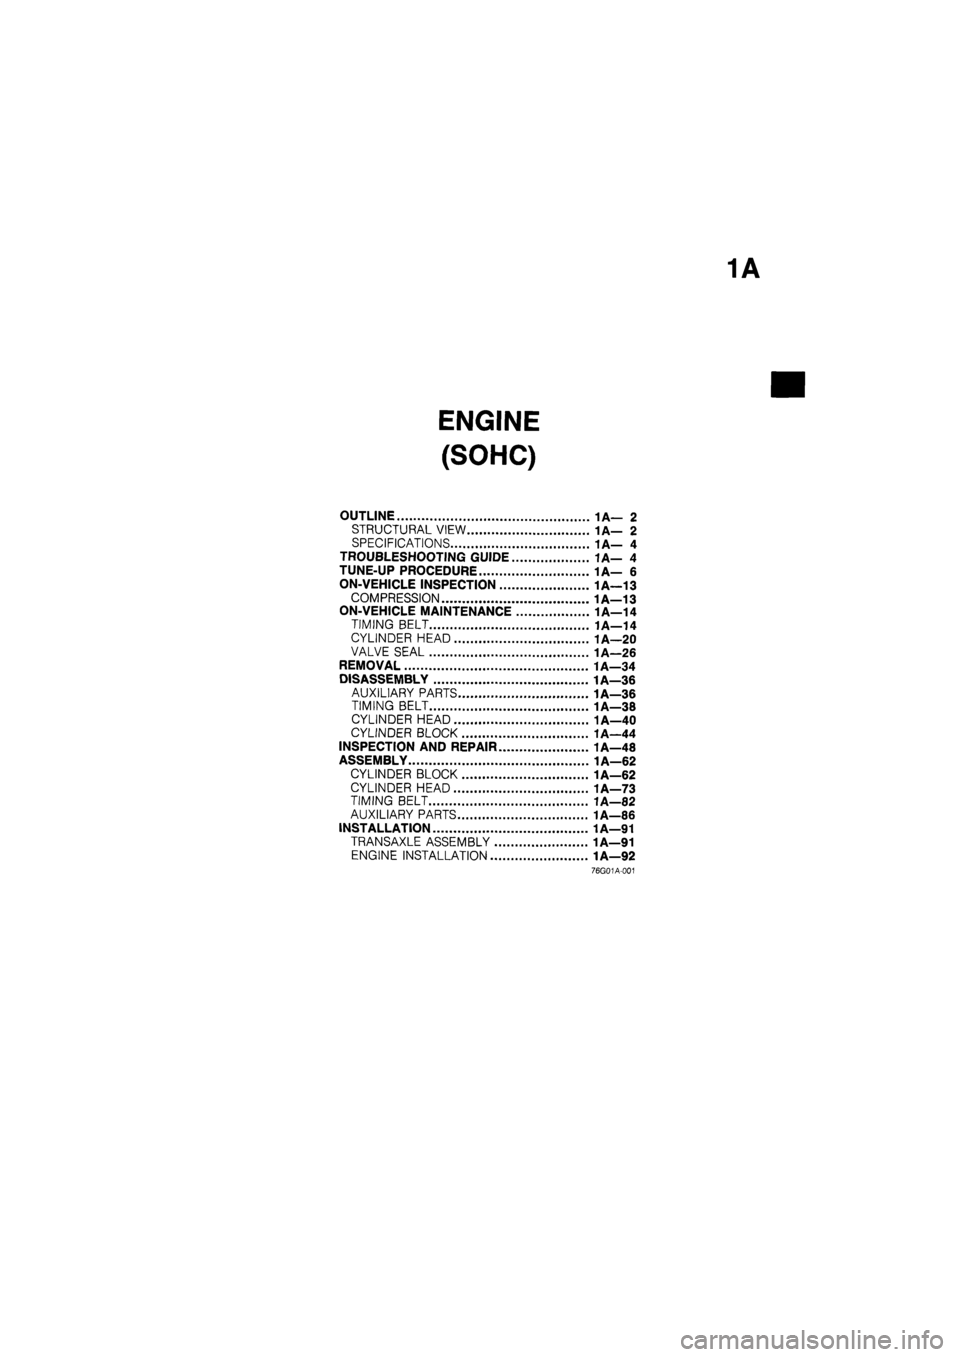 MAZDA 626 1987 Owners Guide 
ENGINE 
(SOHC) 
OUTLINE 1A— 2 
STRUCTURAL VIEW 1A— 2 
SPECIFICATIONS 1A— 4 
TROUBLESHOOTING GUIDE 1A— 4 
TUNE-UP PROCEDURE 1A— 6 
ON-VEHICLE INSPECTION 1A-13 
COMPRESSION 1A—13 
ON-VEHICL